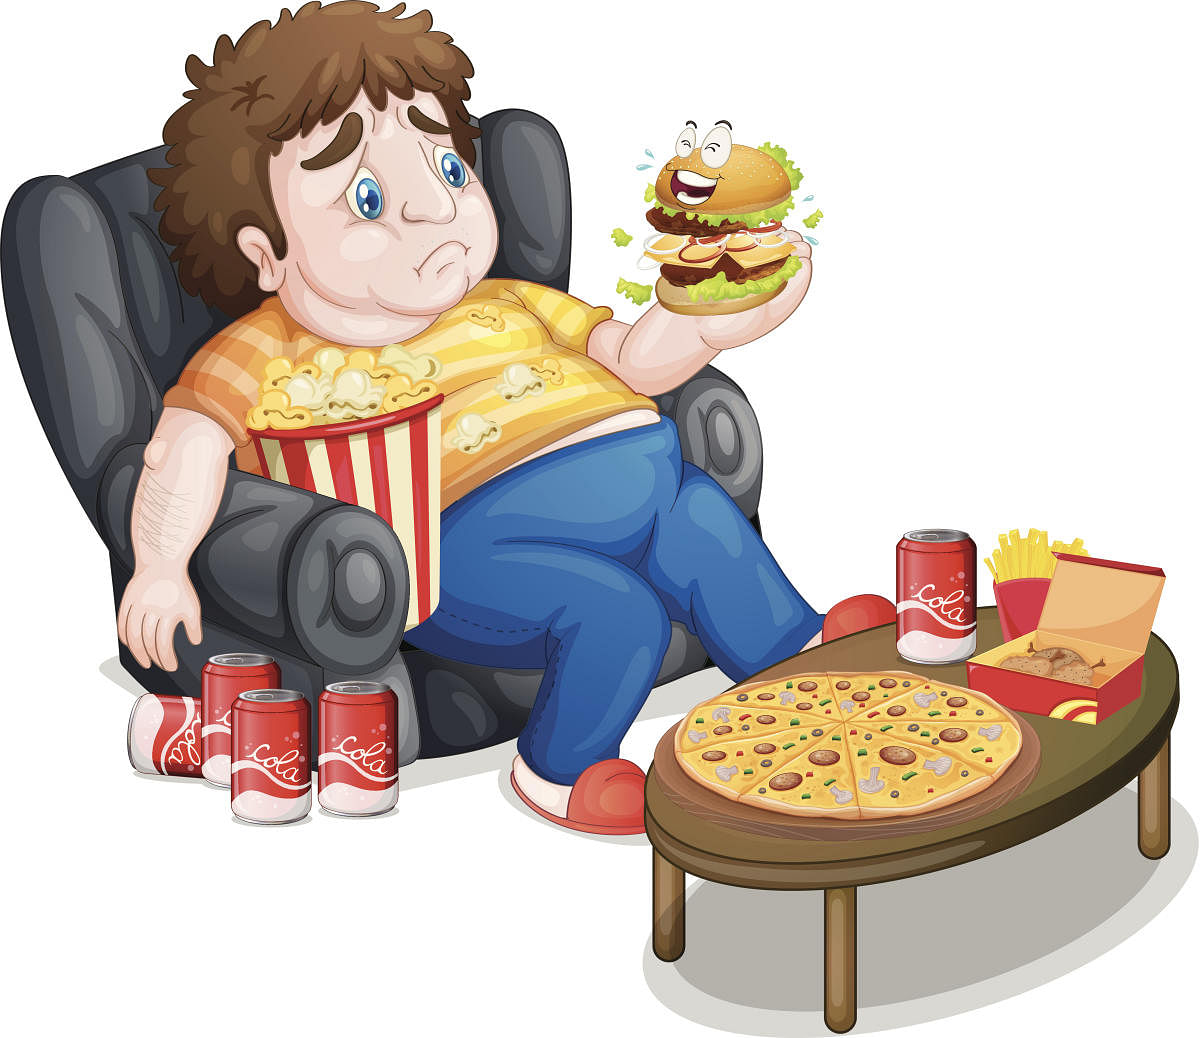 Indulging in a carb-heavy diet in the night is associated with weight gain.